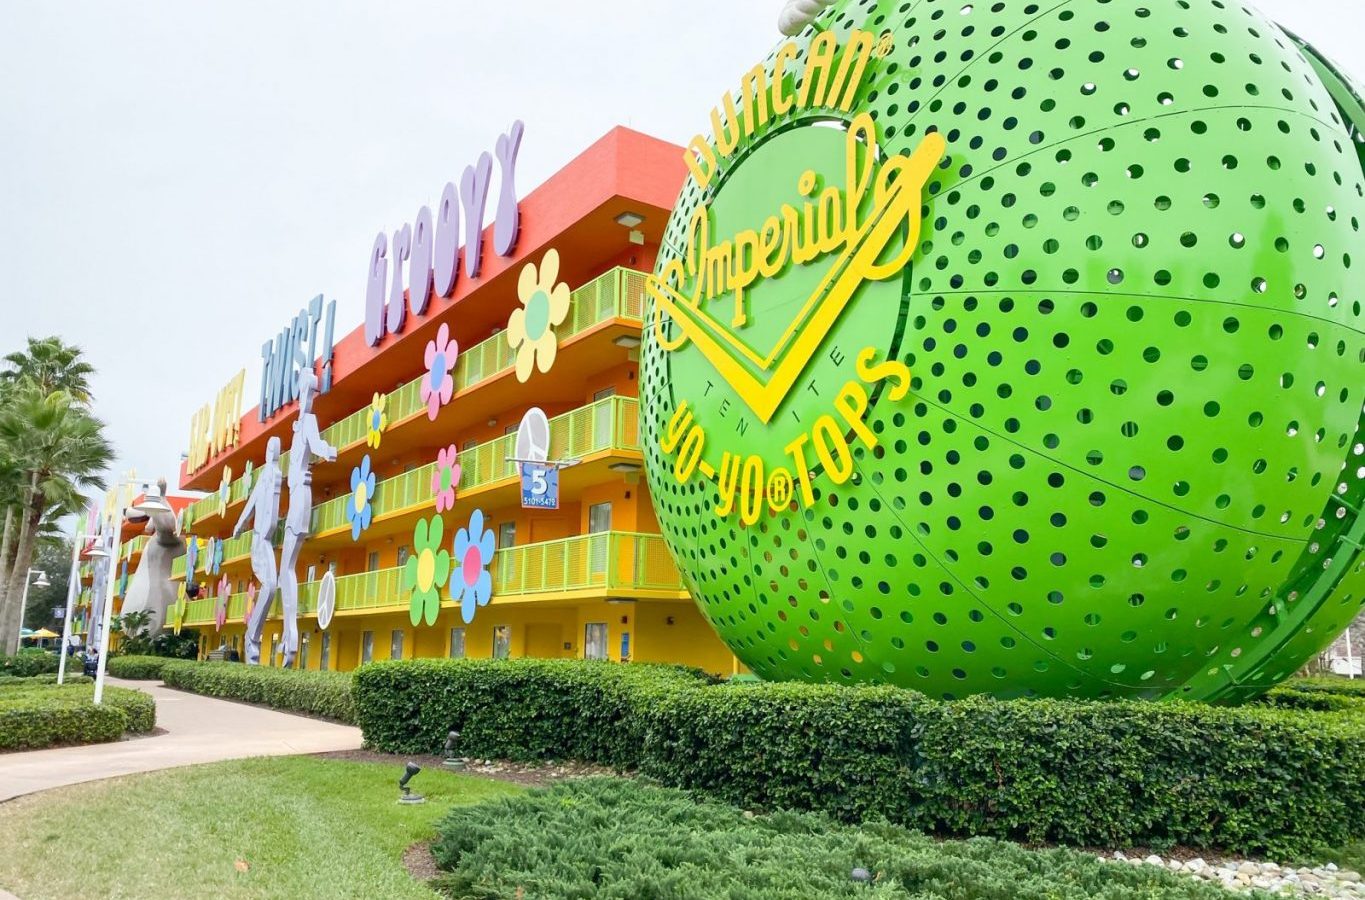 The giant Yo-Yo in front of one of the Disney Value Resorts catches the eye, adds theming, and ensures your stay will be as bright and bold as the colors of this hotel.